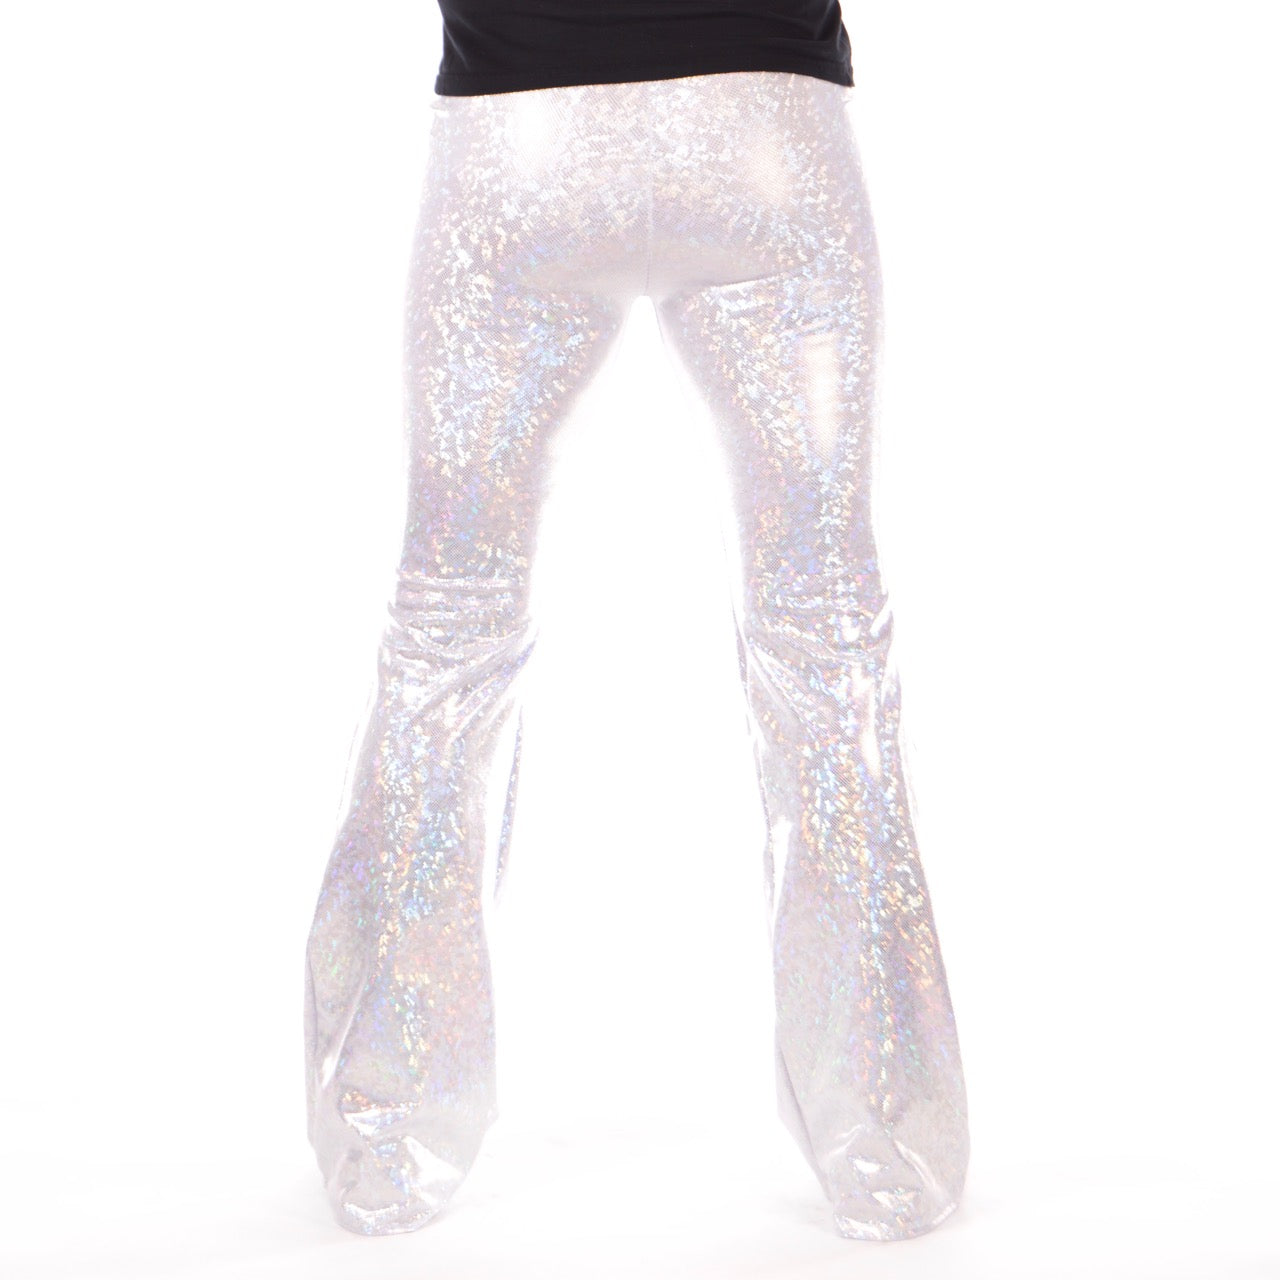 Disco White: Holographic Men's Flares - 70's Men's Bell Bottoms or Whi ...